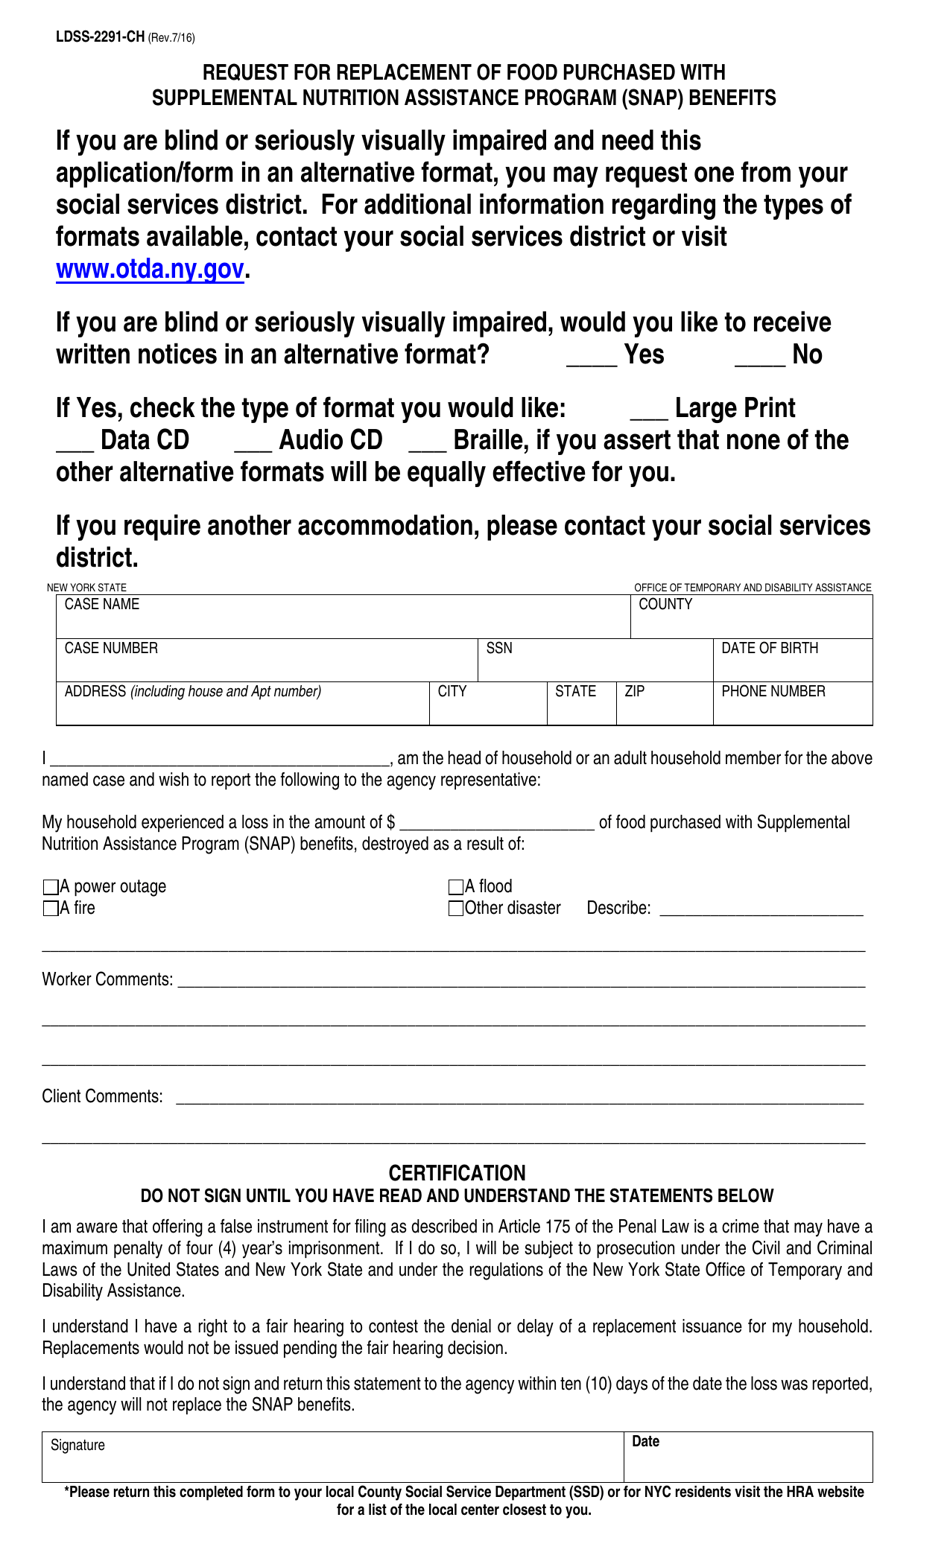 Form LDSS-2291 Request for Replacement of Food Purchased With Supplemental Nutrition Assistance Program (Snap) Benefits - New York (English / Chinese), Page 1